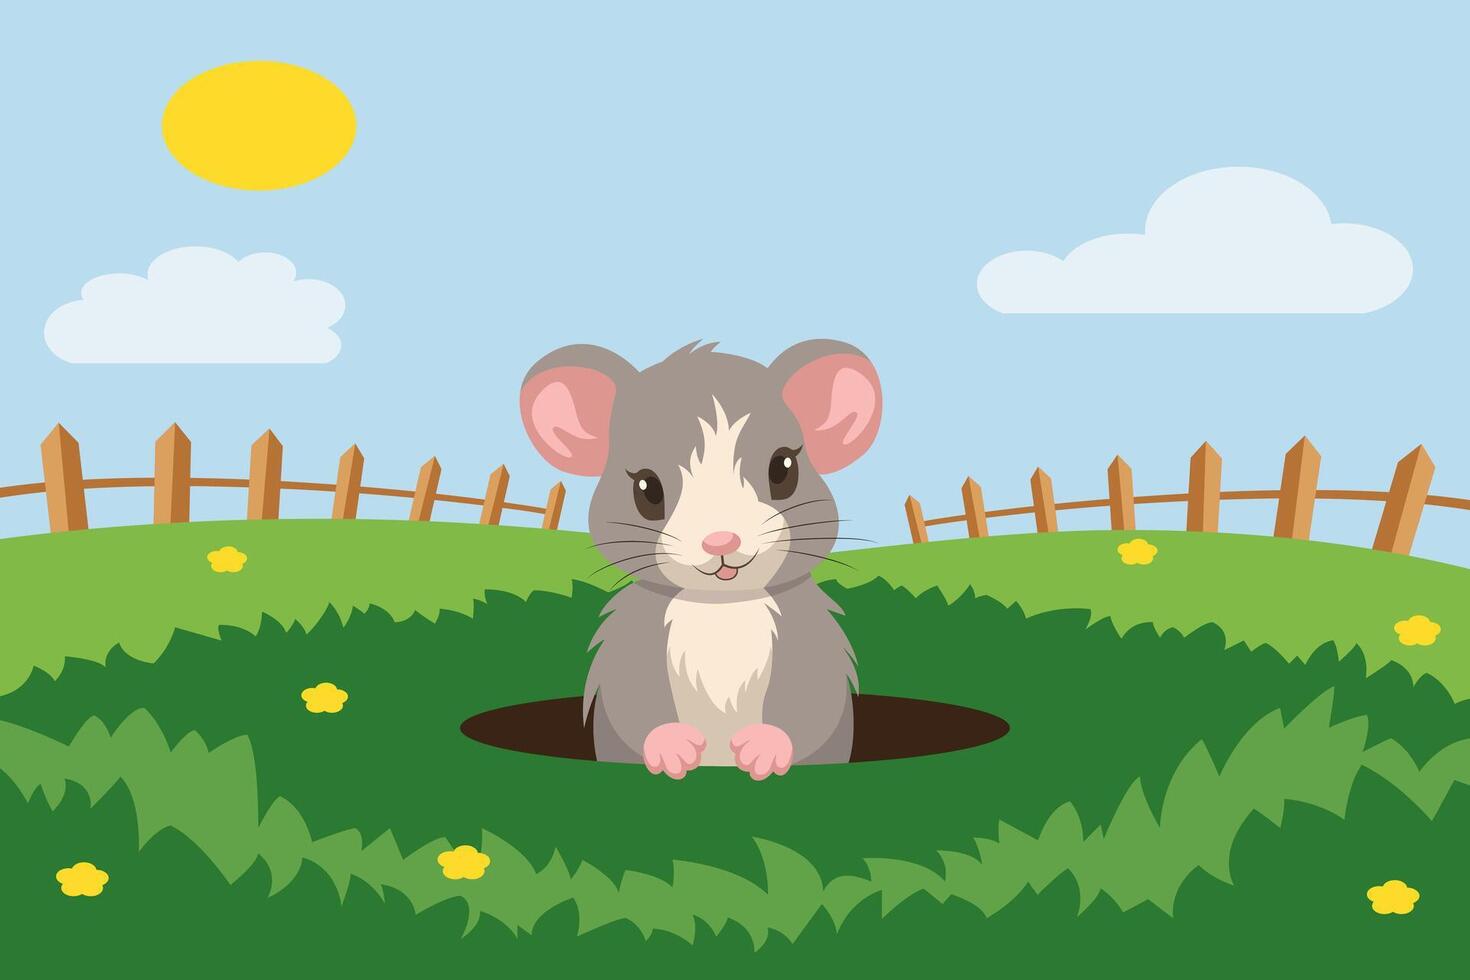 A mouse comes out of a hole on a green lawn. Illustration in vector format.